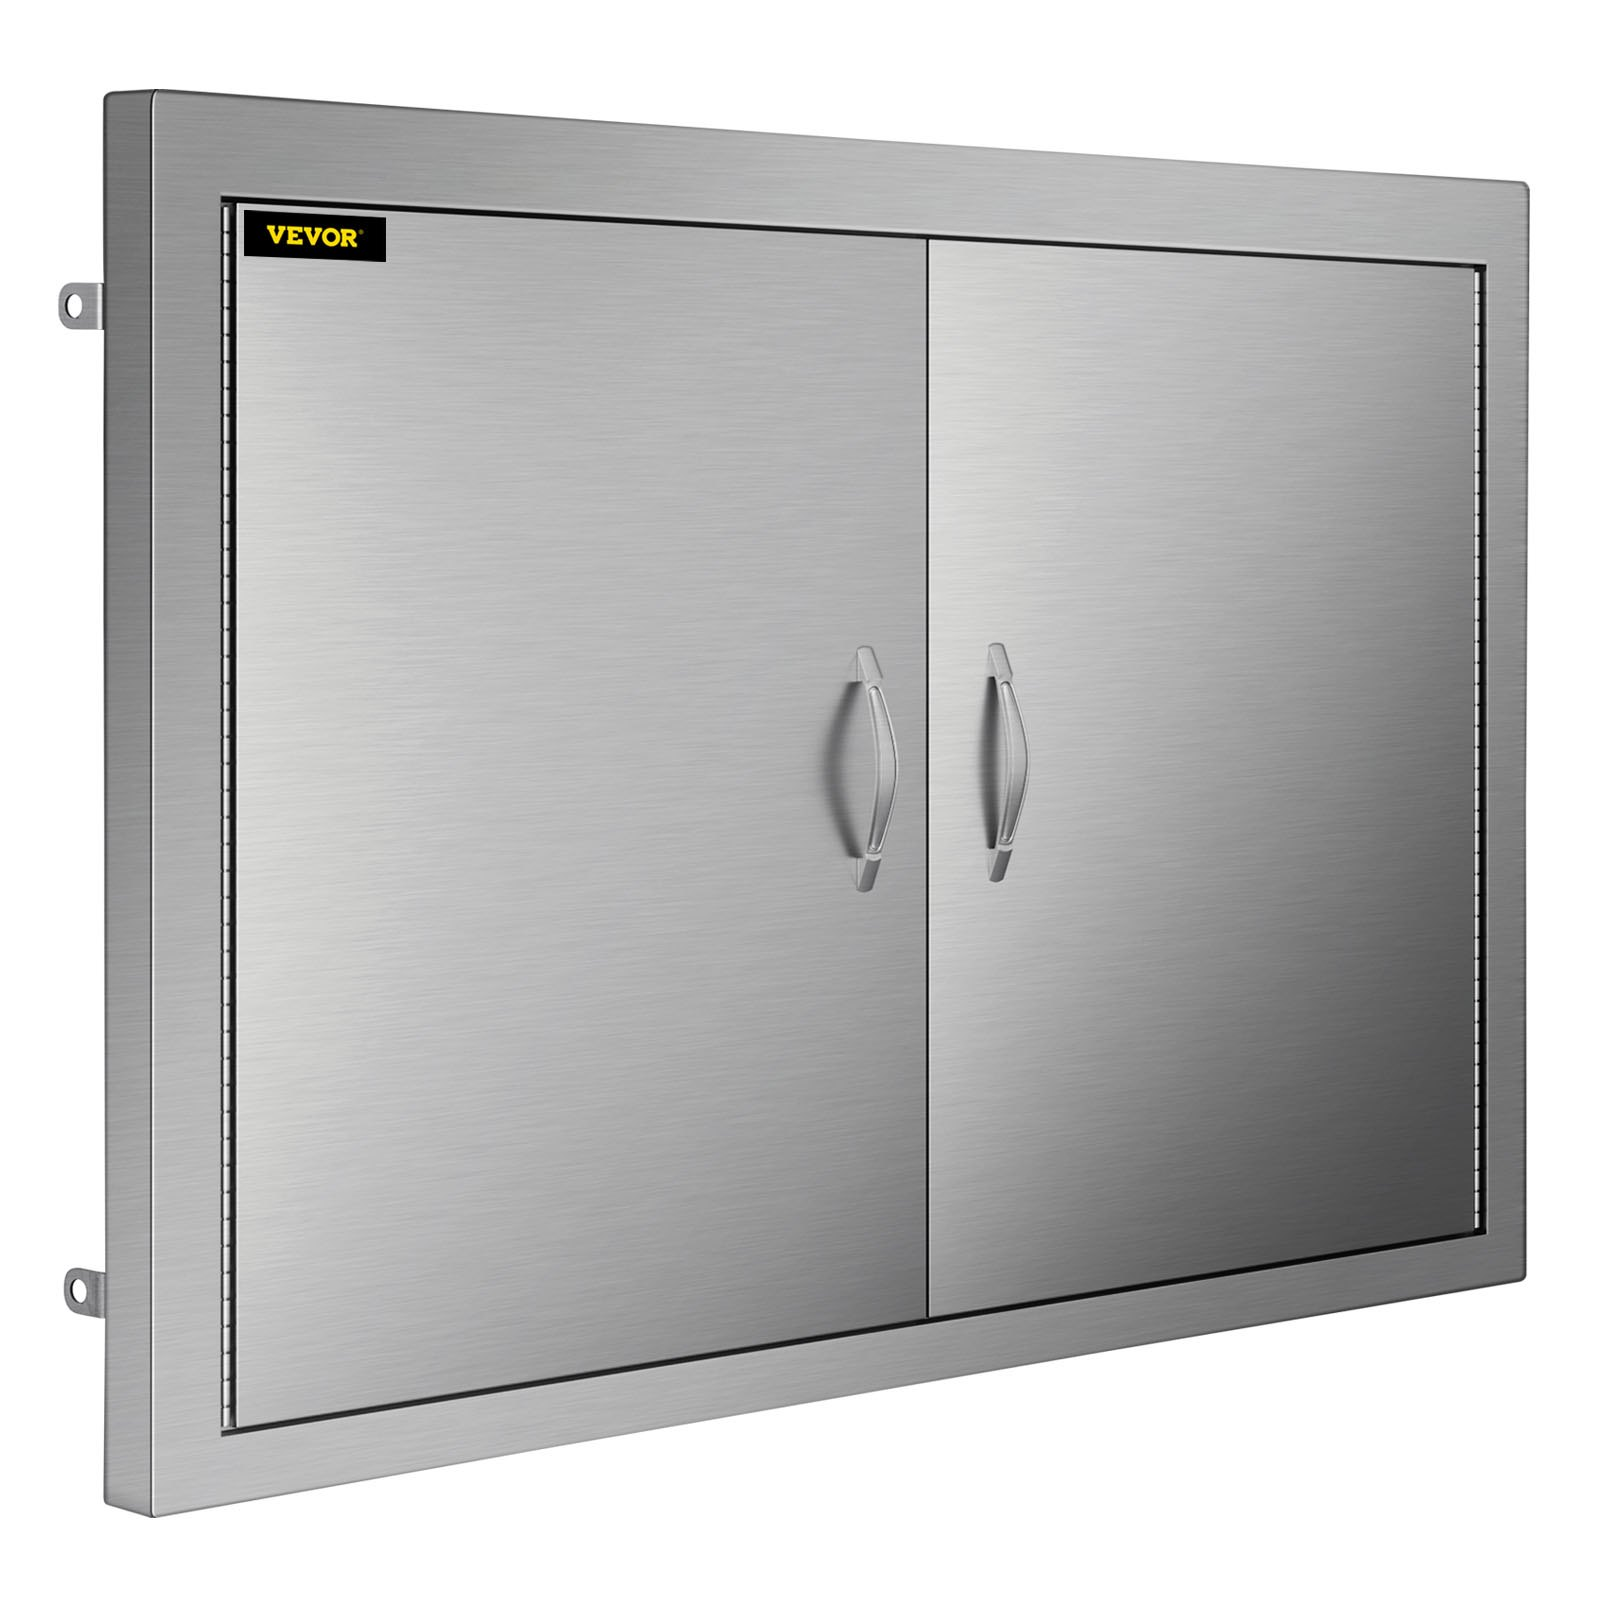 VEVOR BBQ Access Door 28W X 19H Inch, Double BBQ Door Stainless Steel, Outdoor Kitchen Doors for BBQ Island, Grill Station, Outside Cabinet, Goodies N Stuff